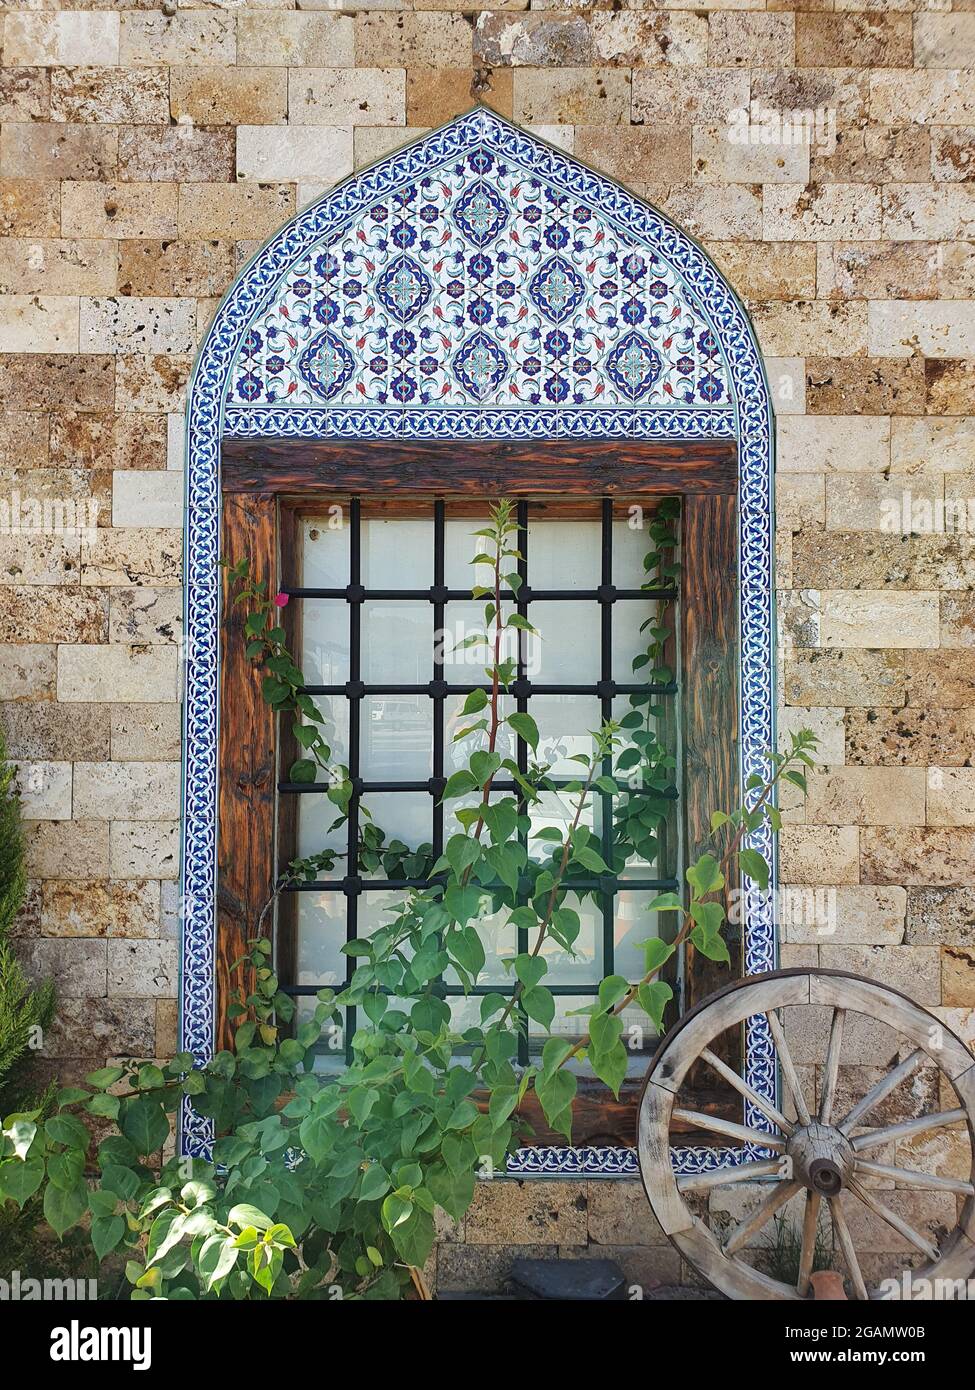 Window of an old building in Turkish style. The building is built of stone. The framing is made of painted tiles. Stock Photo